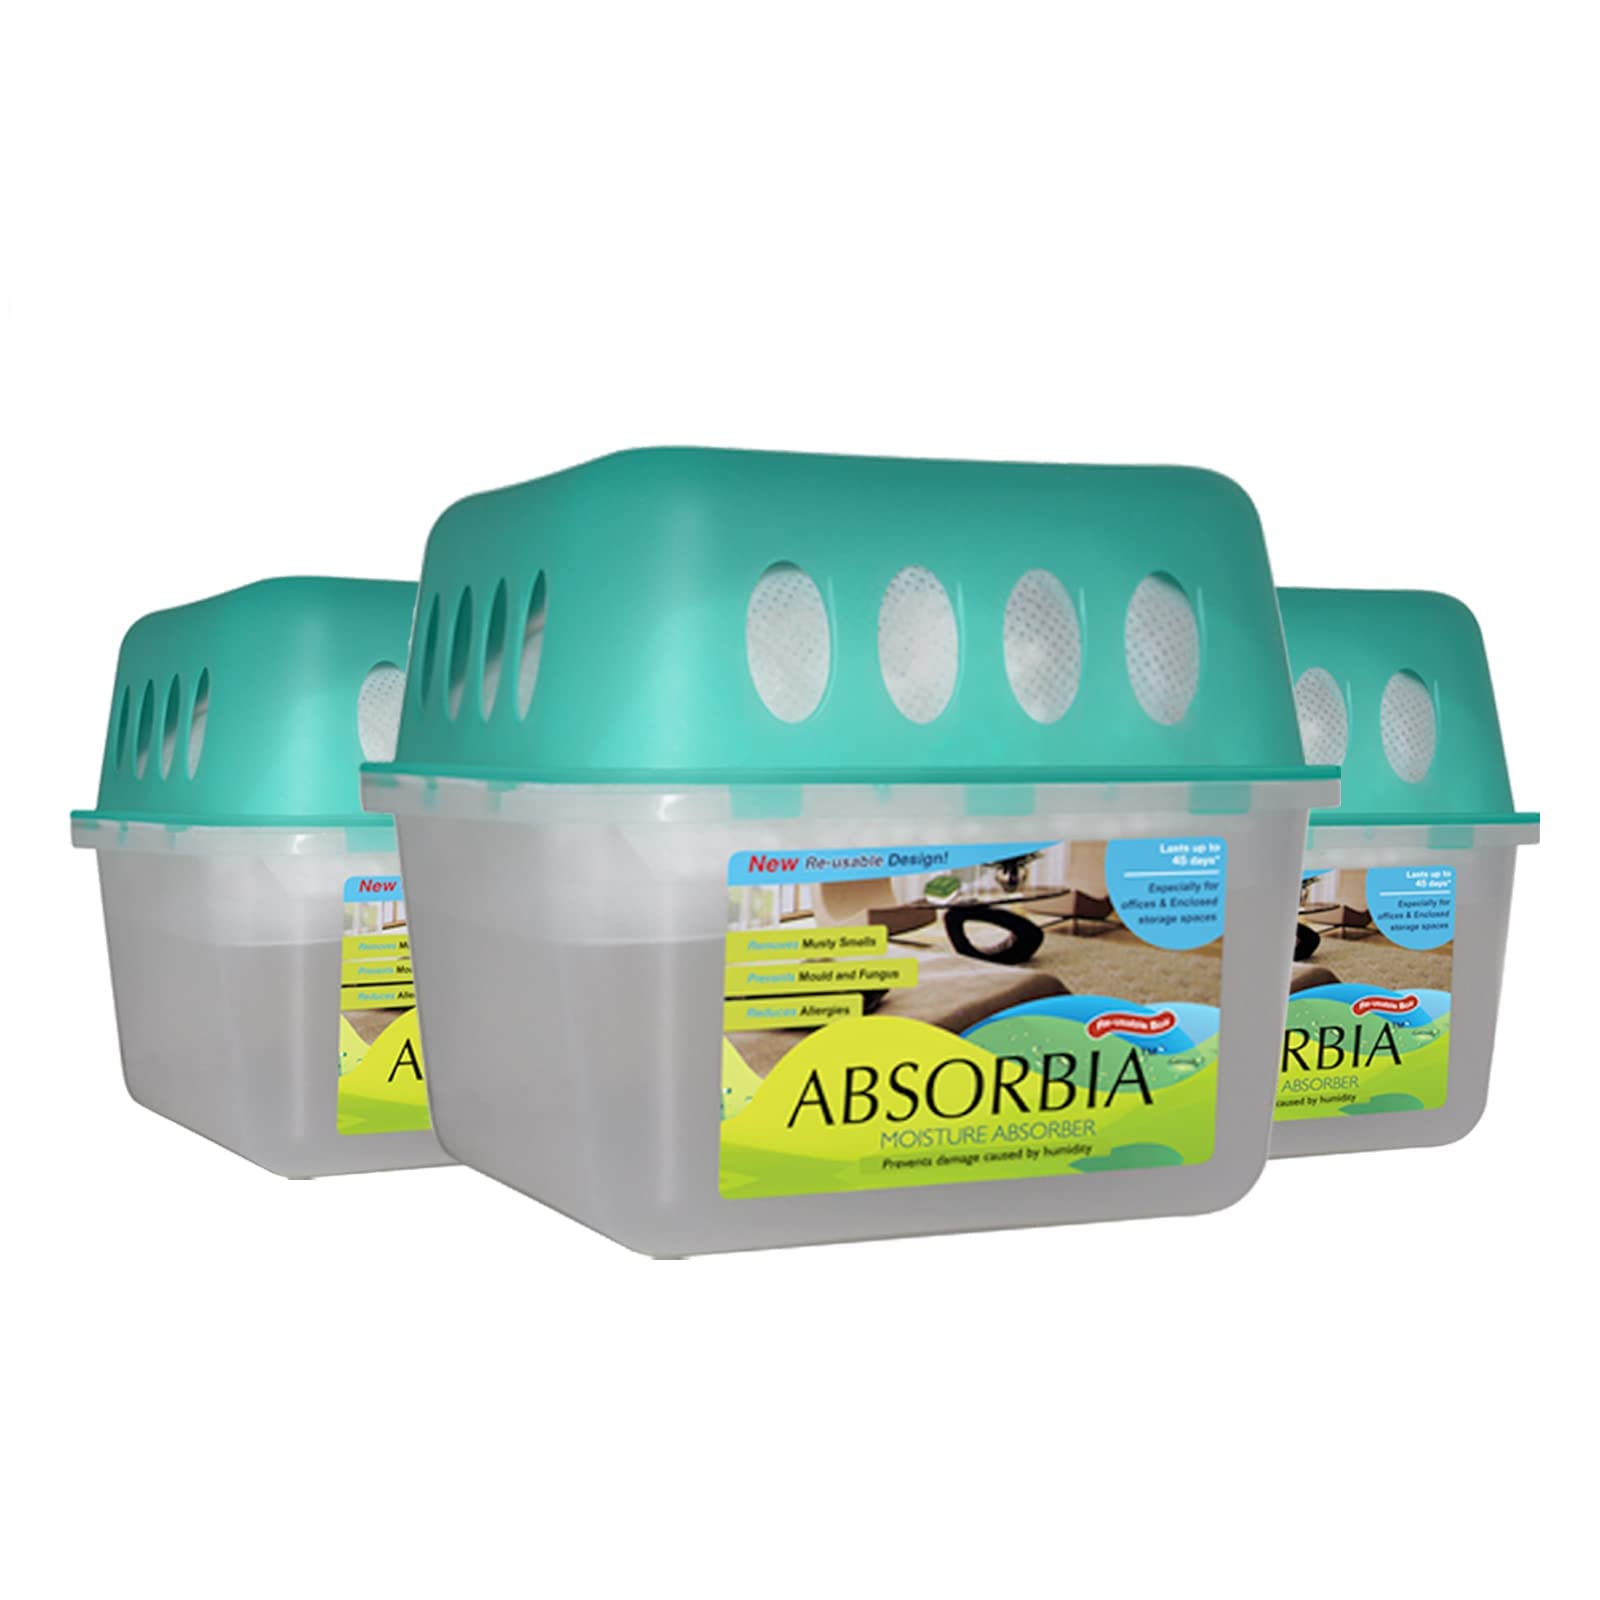 Absorbia Moisture Absorber | Absorbia Reusable Box w/Refill - Pack of 9 (800ml) | Dehumidifier for Basement, Storerooms, Spare Rooms Lofts | Fights Against Moisture, Mould, Fungus Musty Smells